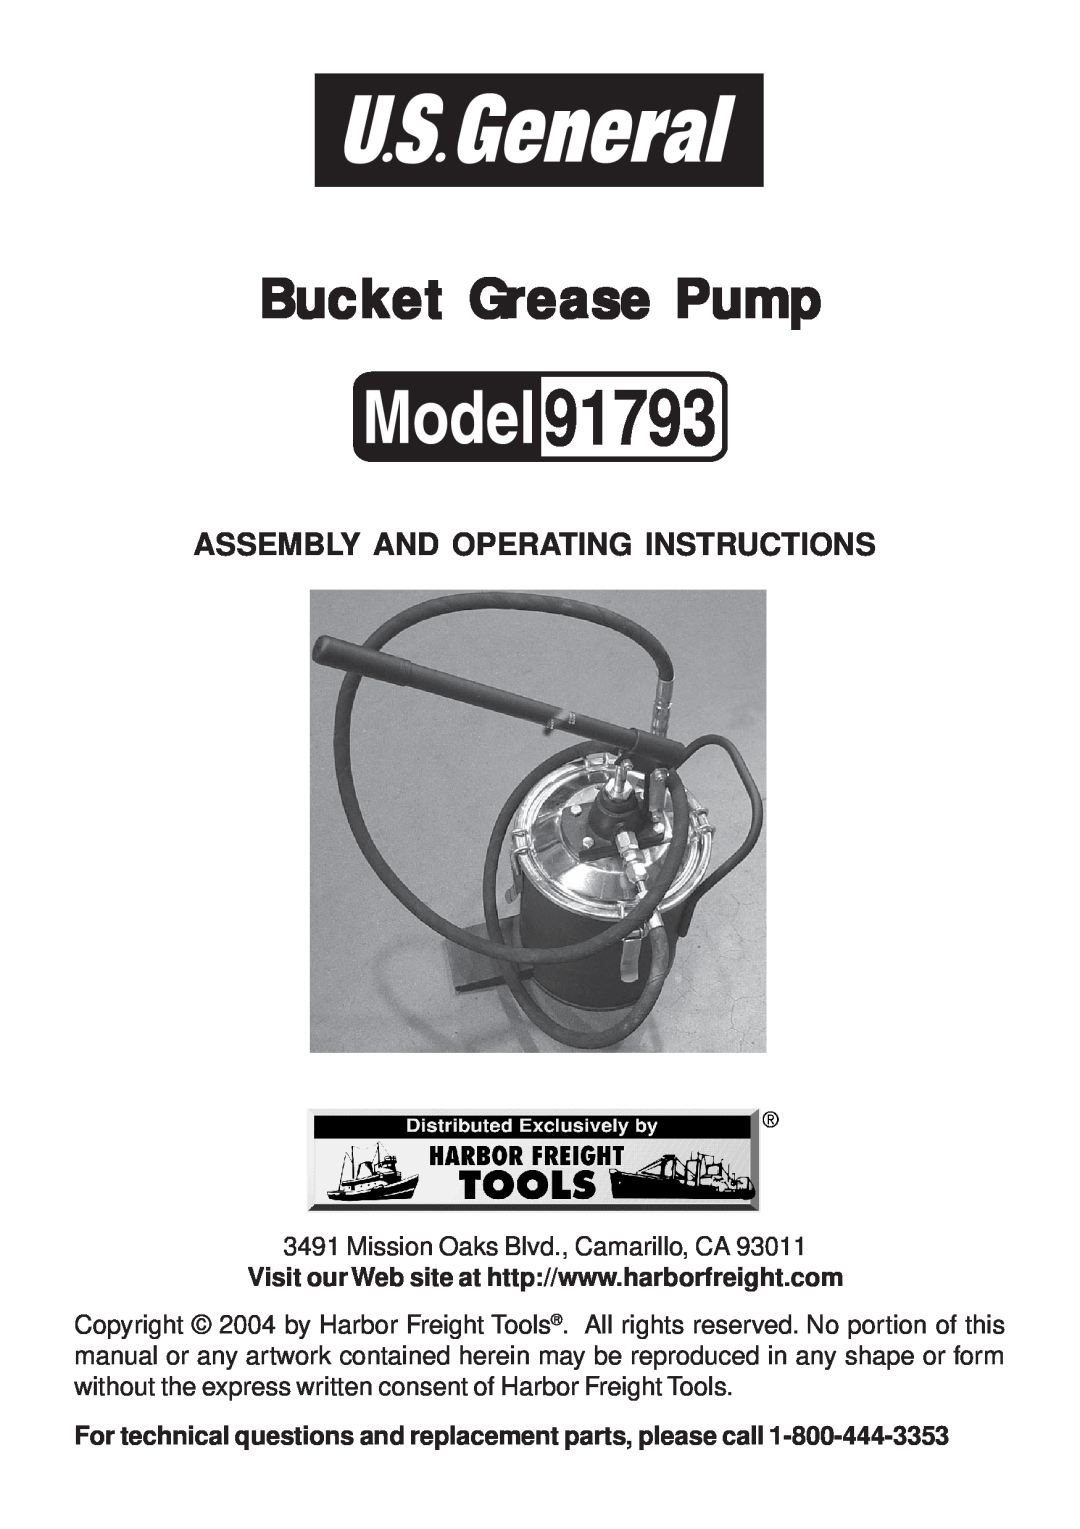 Harbor Freight Tools 91793 manual Assembly And Operating Instructions, Bucket Grease Pump 